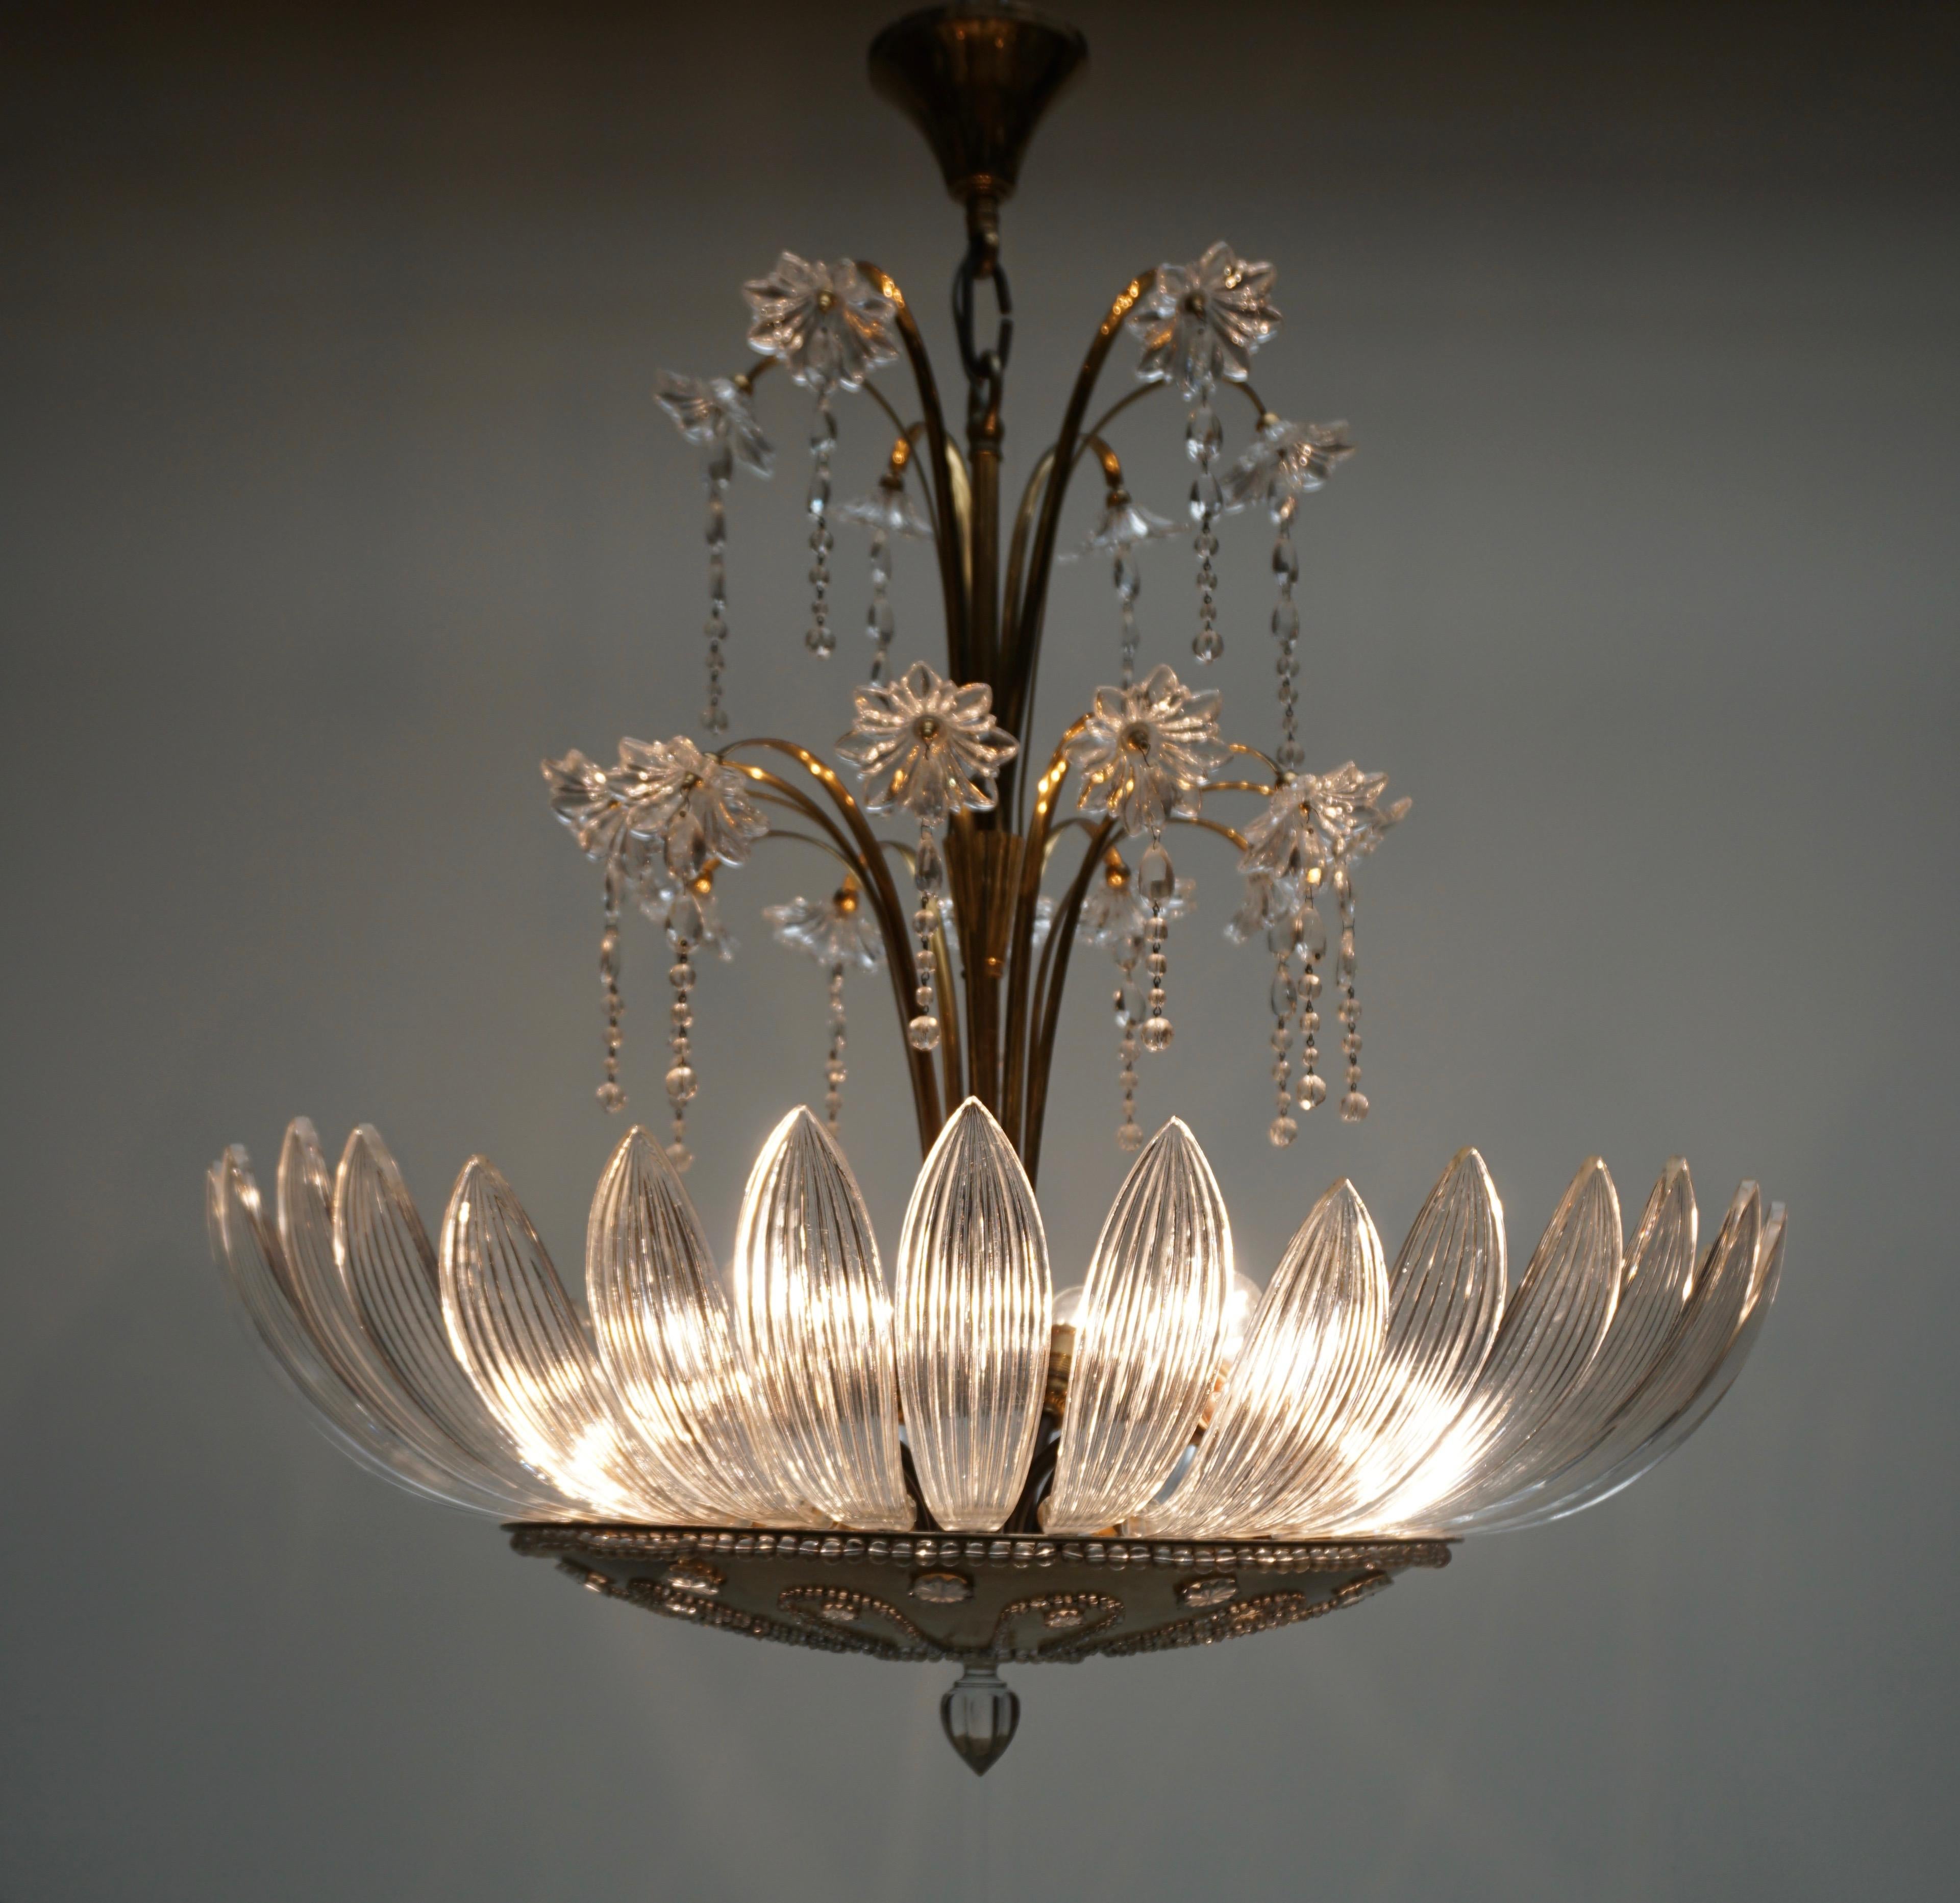 Gorgeous Italian midcentury Murano glass chandelier with hand blown glass. 
Measures:
Diameter 78 cm 
Height fixture 70 cm
Total height with canopy 90 cm
Ten E27 light bulbs / Good working condition/European wiring.